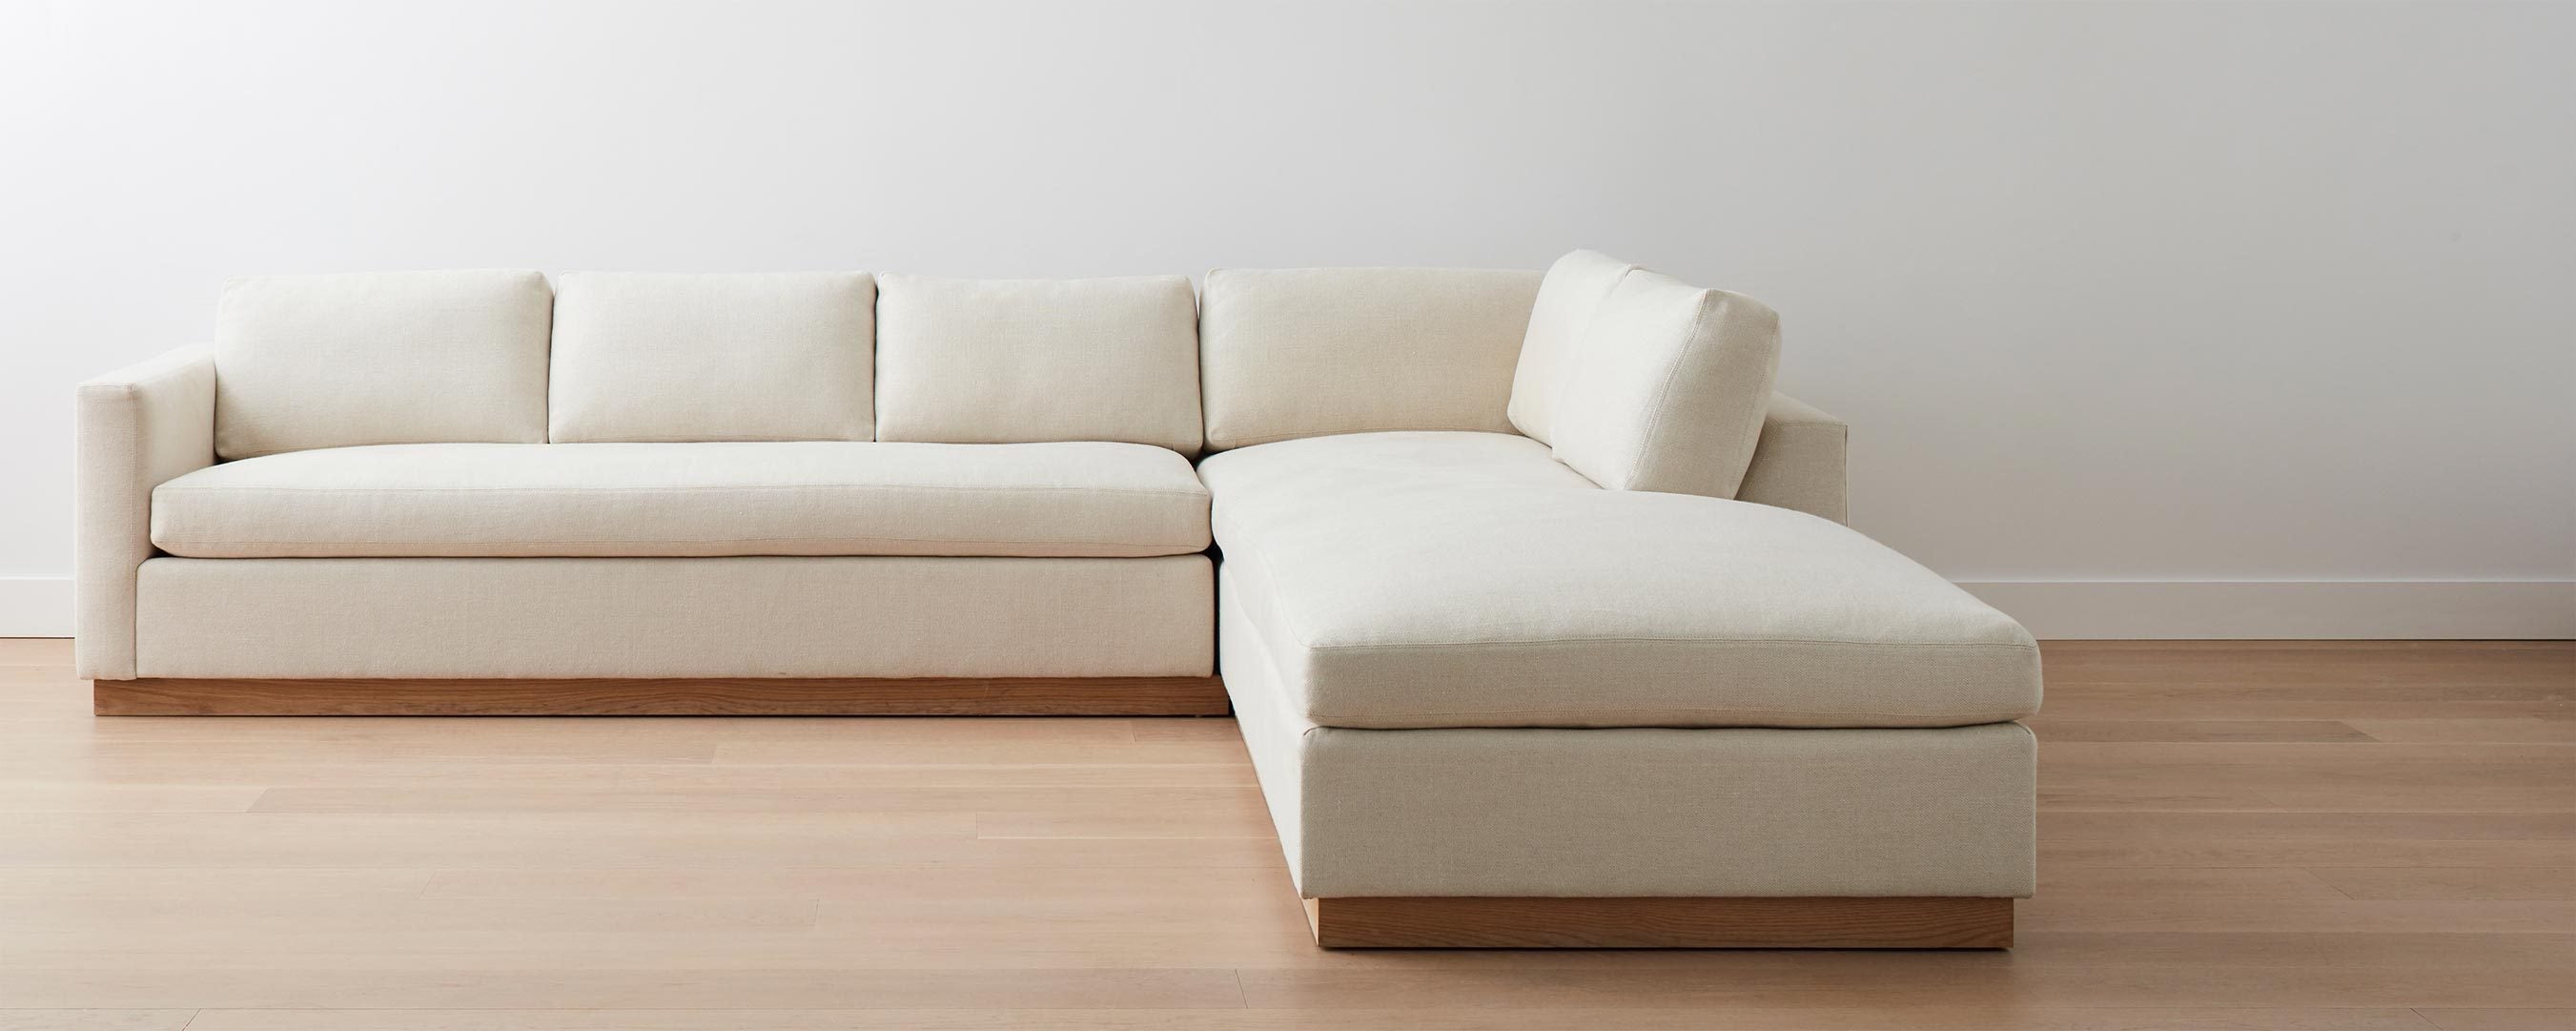 the homenature halsey sectional